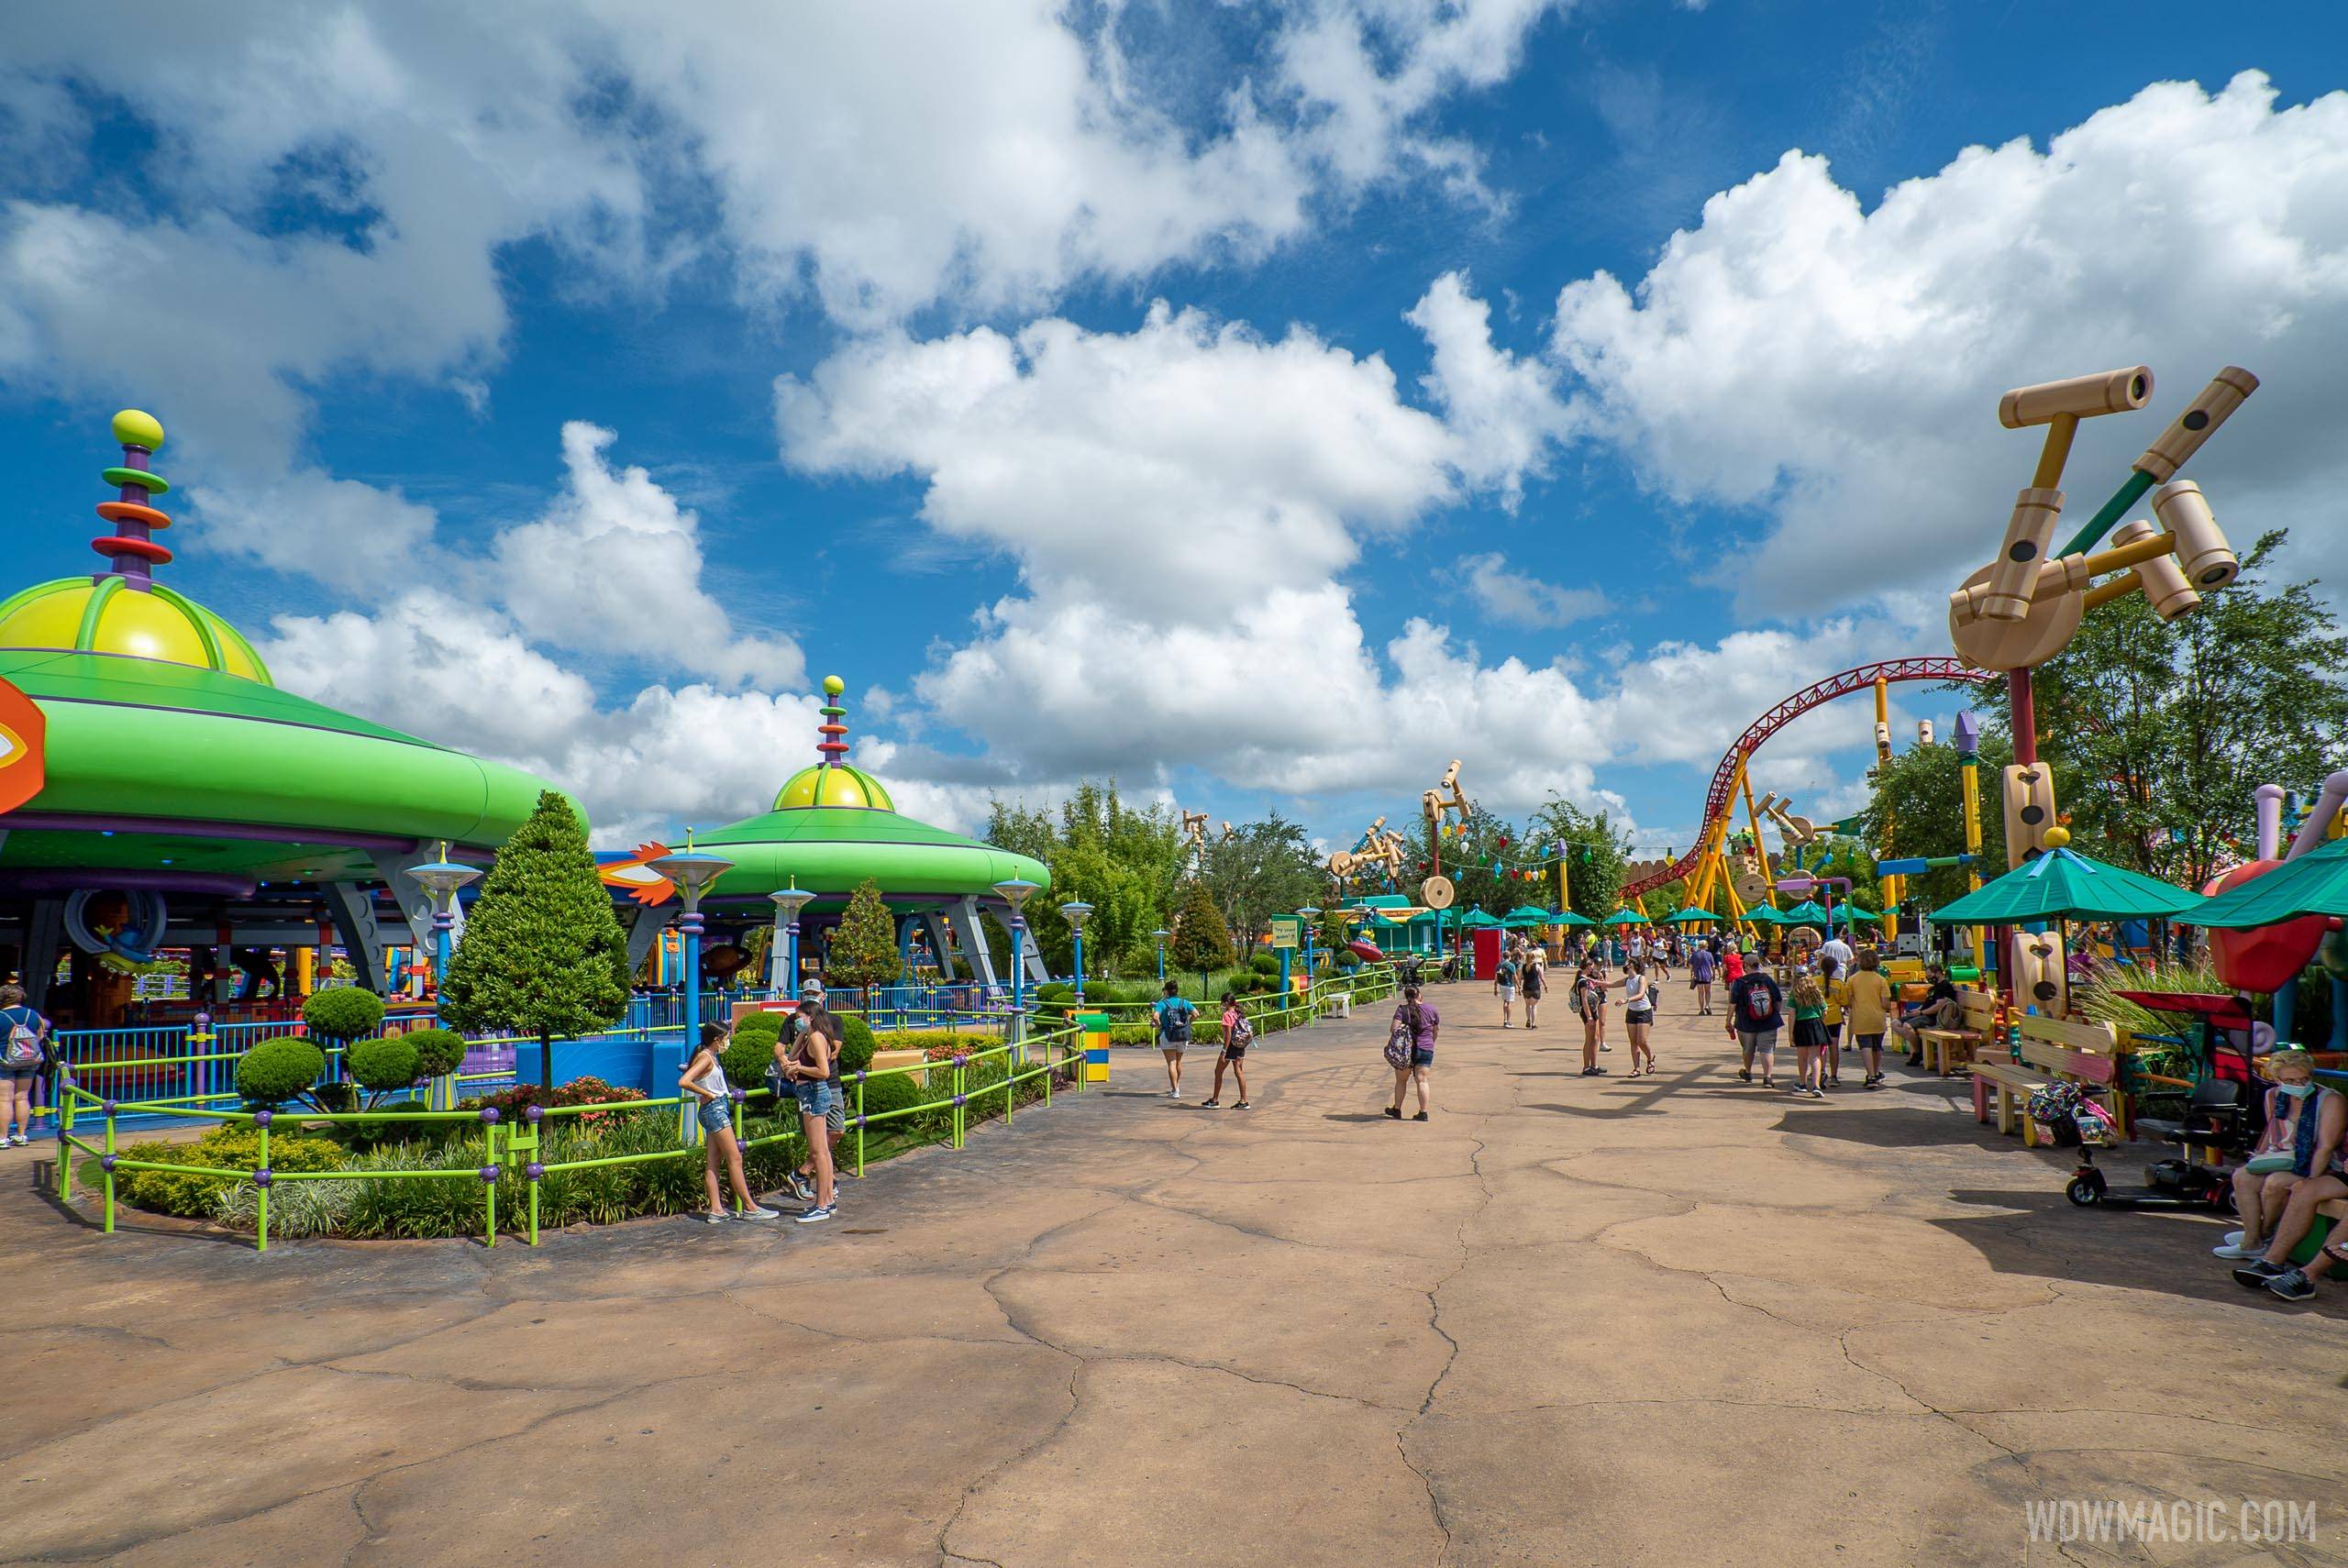 Toy Story Land still feels the most busy with physical distancing